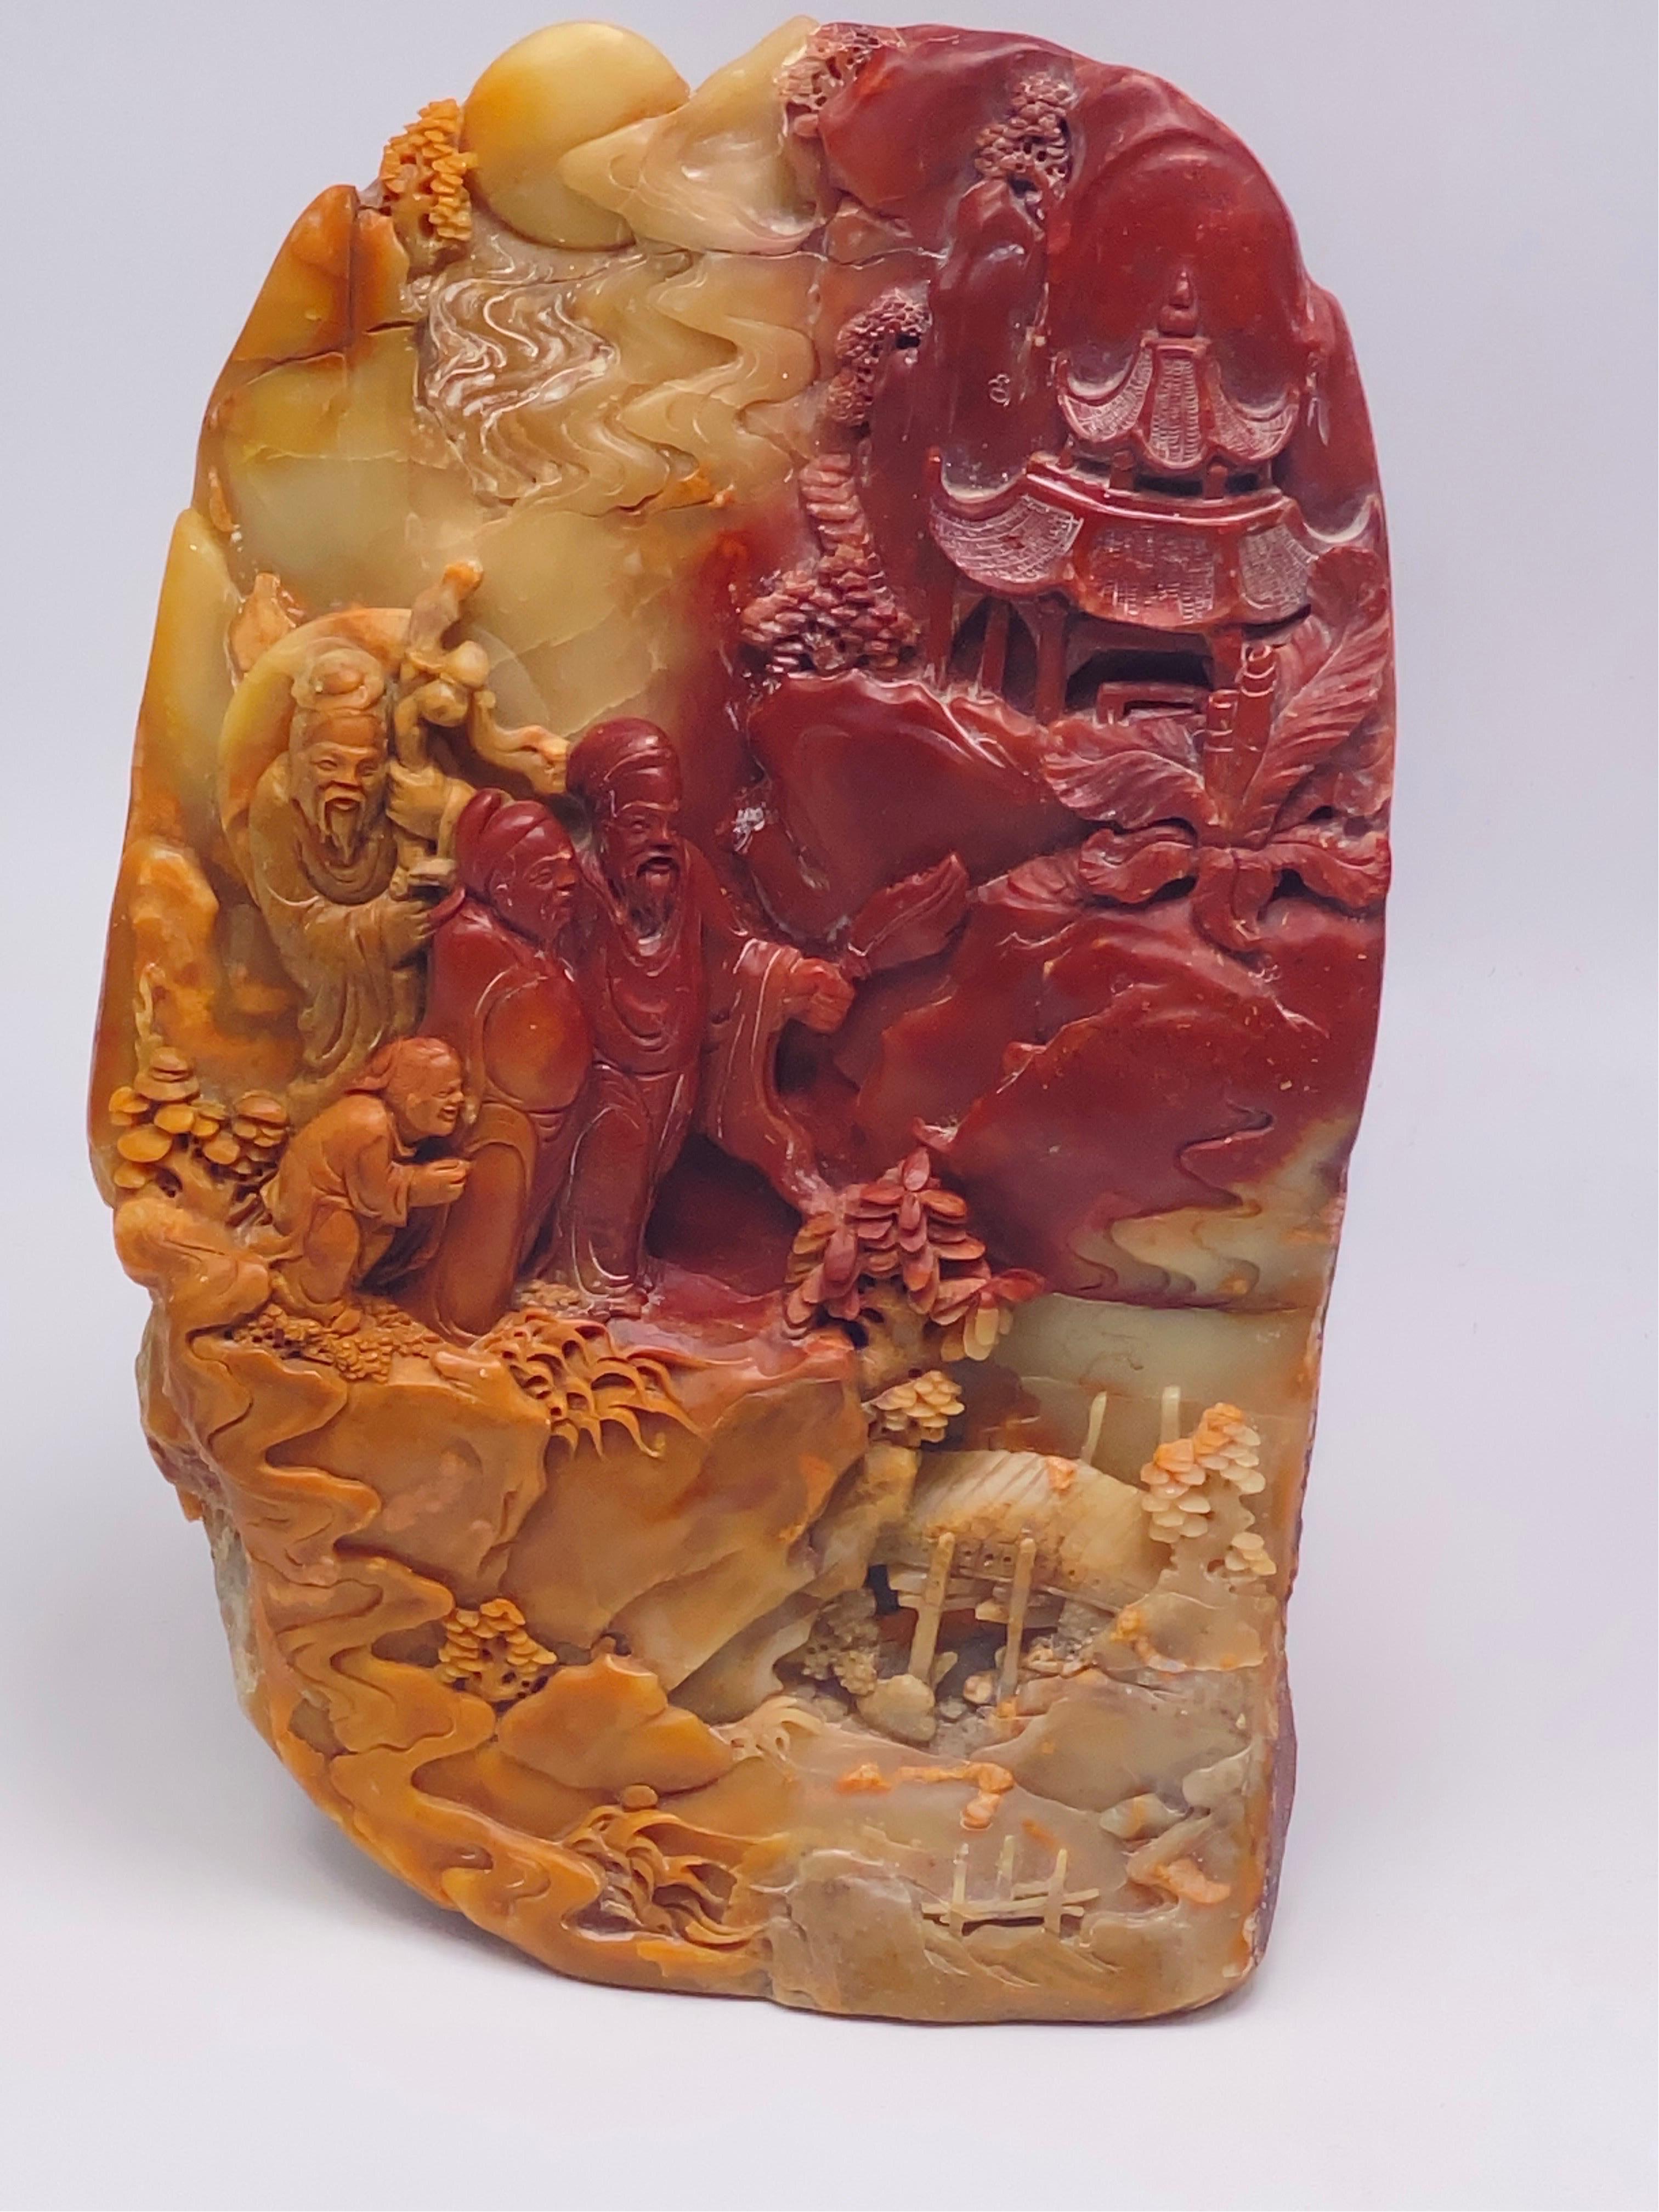 This a sculpture of a group of carachters, a village, on the mountain. In Serpentine stone, in Beige and red color. Very heavy.